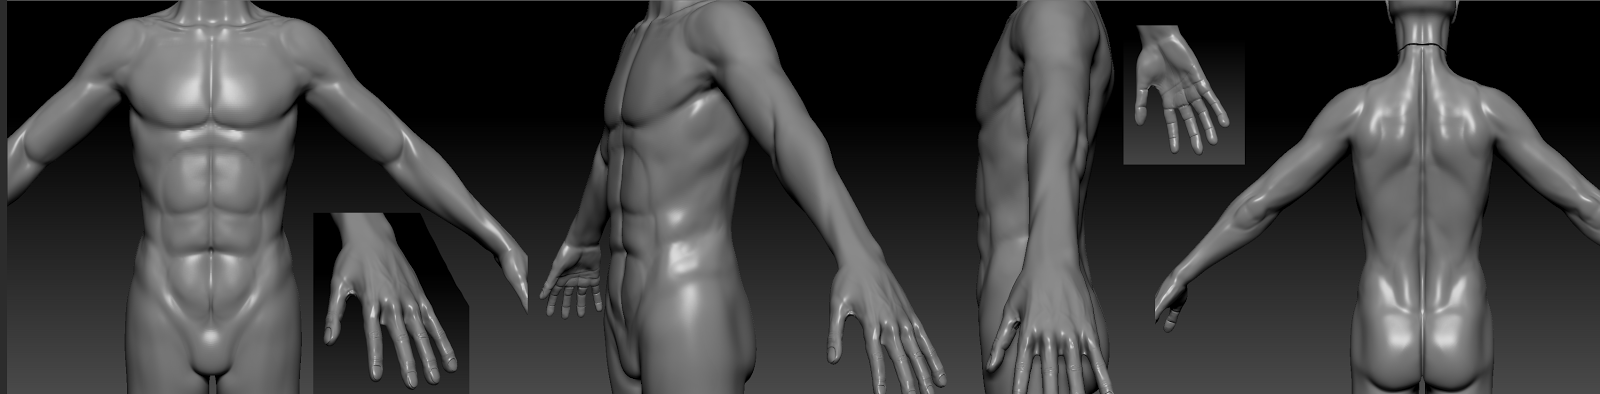 body+details+2.png